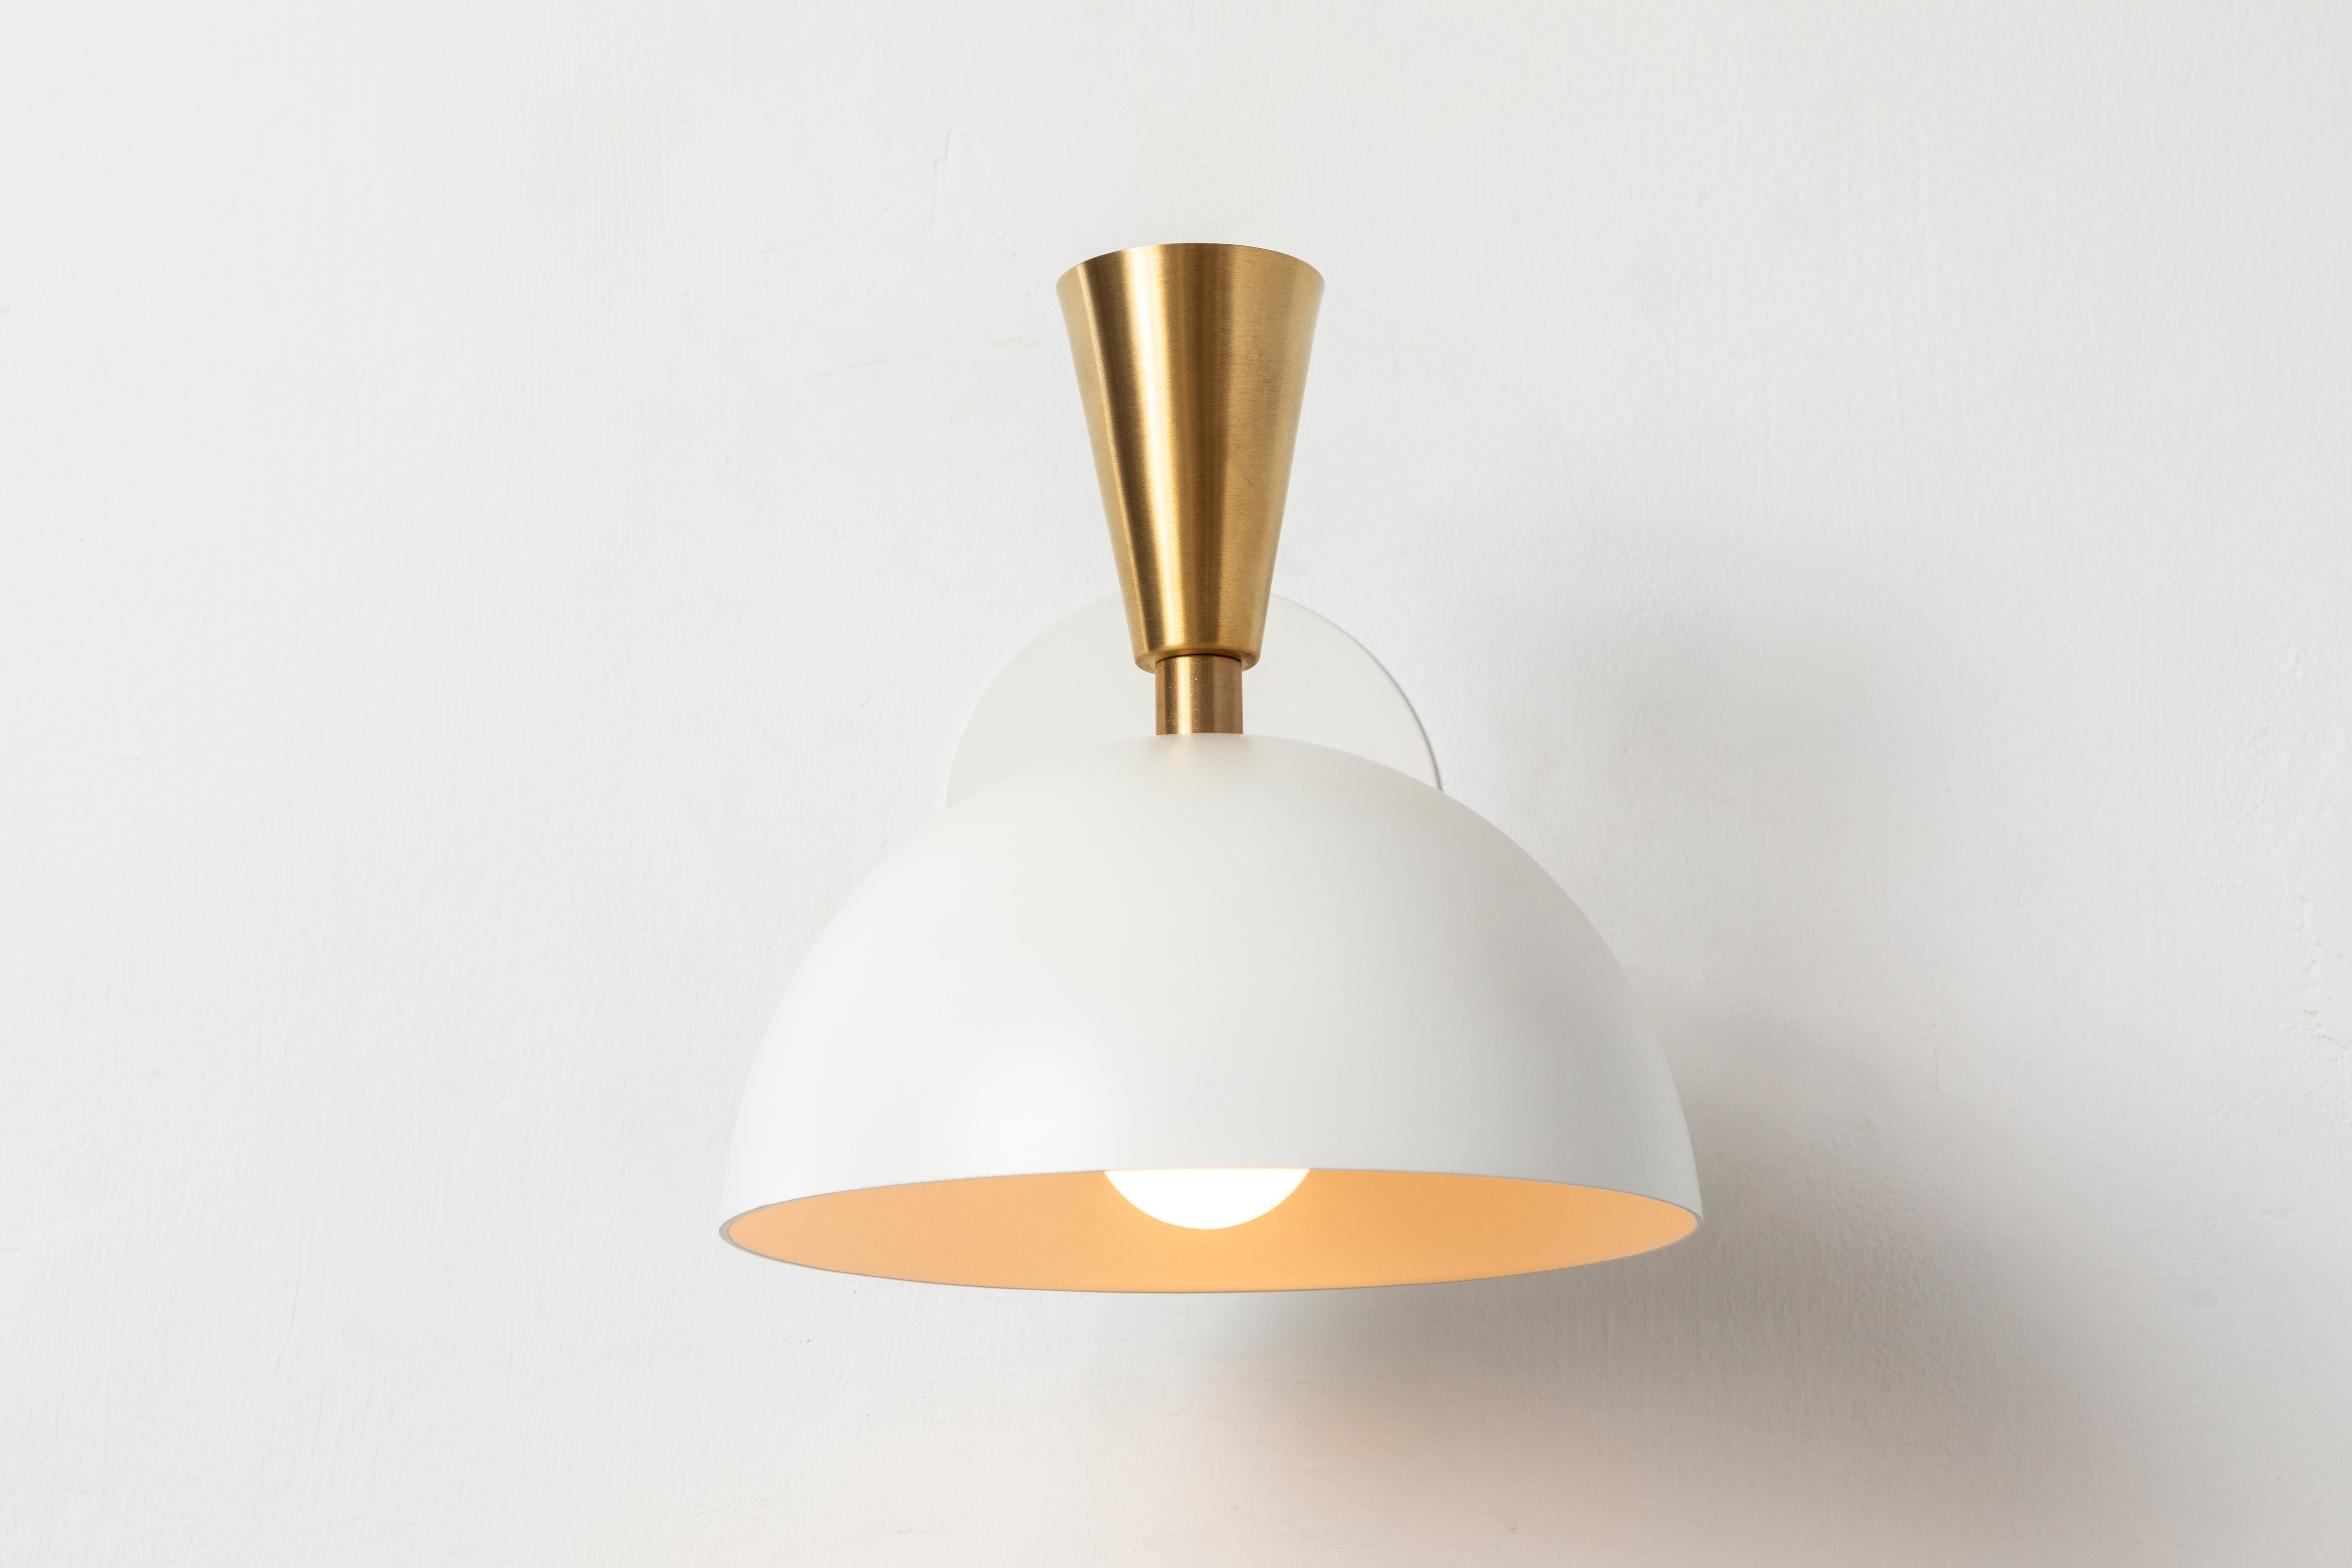 Pair of large 'Lola II' sconces in white metal and brass. 

Hand-fabricated by Los Angeles based designer and lighting professional Alvaro Benitez, these highly refined sconces are reminiscent of the iconic midcentury Italian designs of Arteluce and